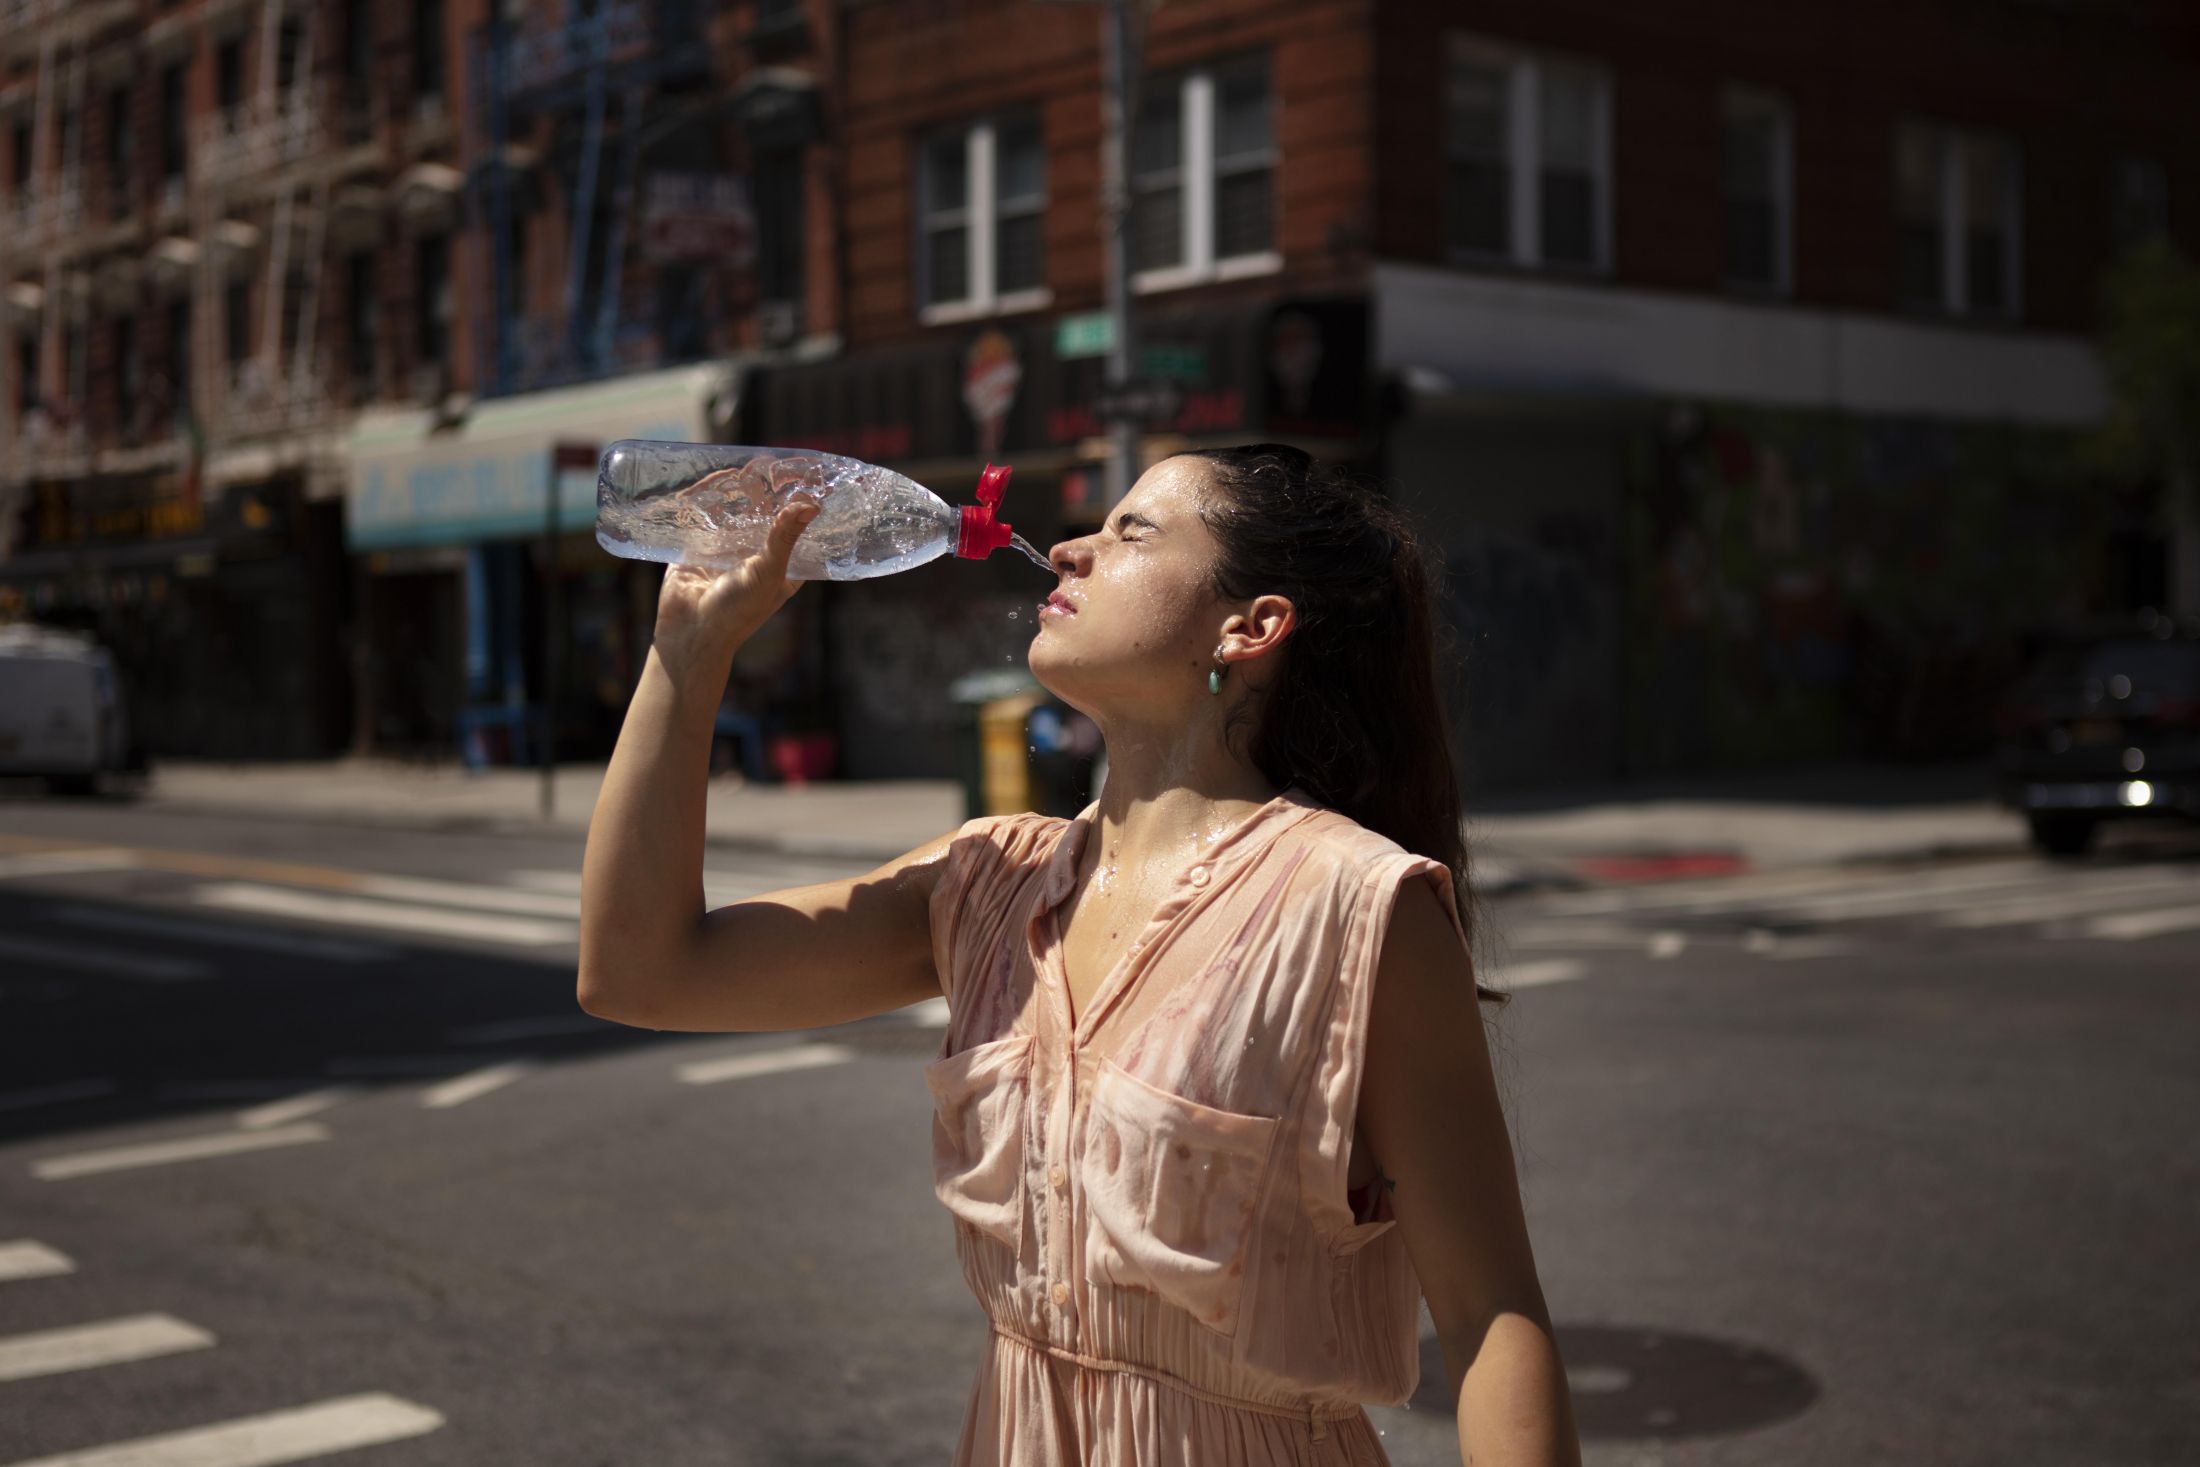 young-woman-tolerating-heat-wave-with-cool-drink.jpg